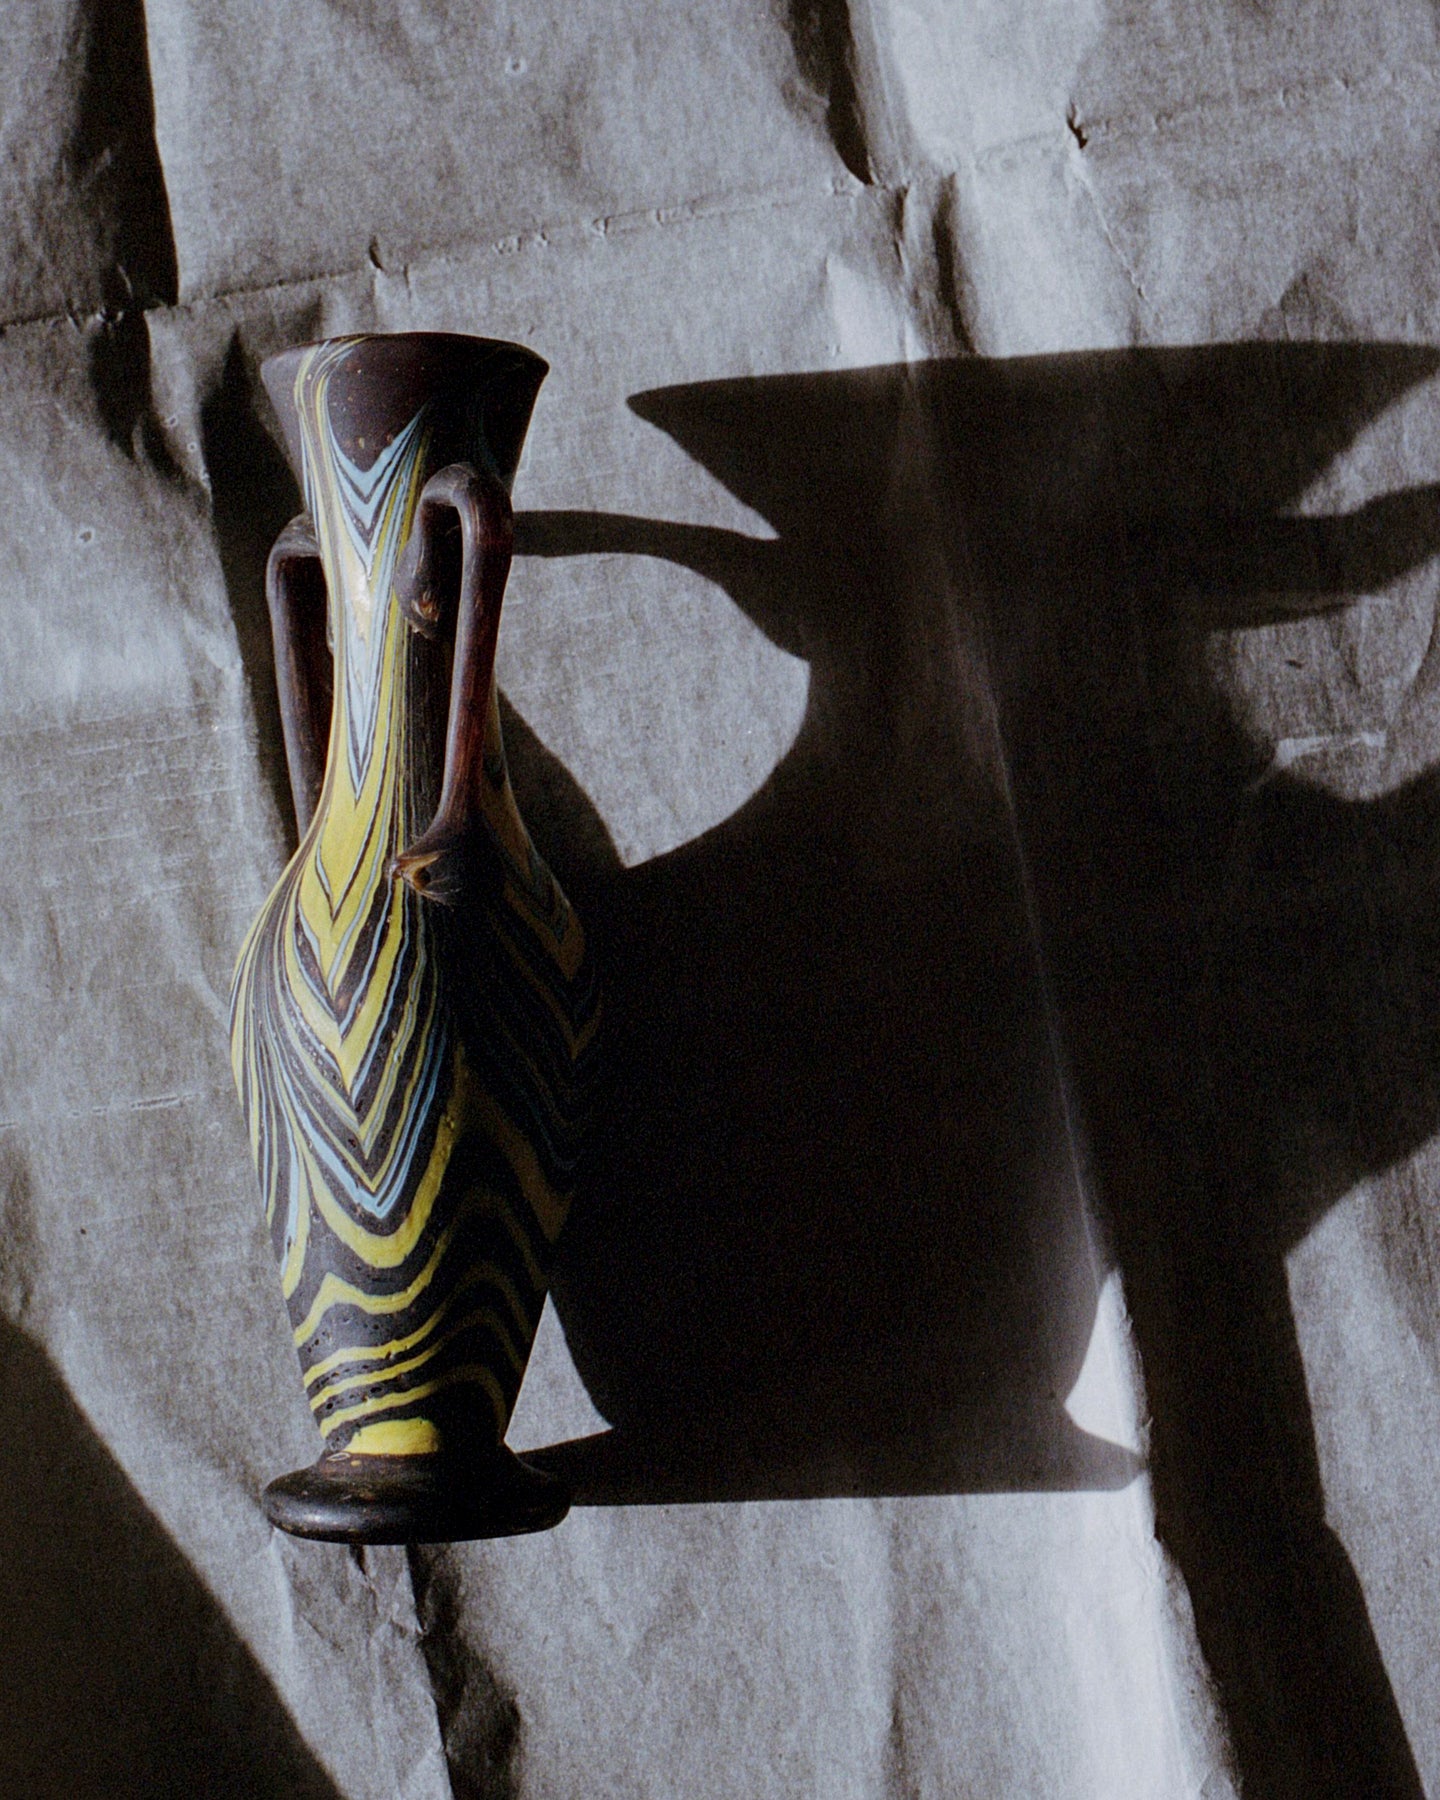 Phoenician glass vase - black, yellow and blue.